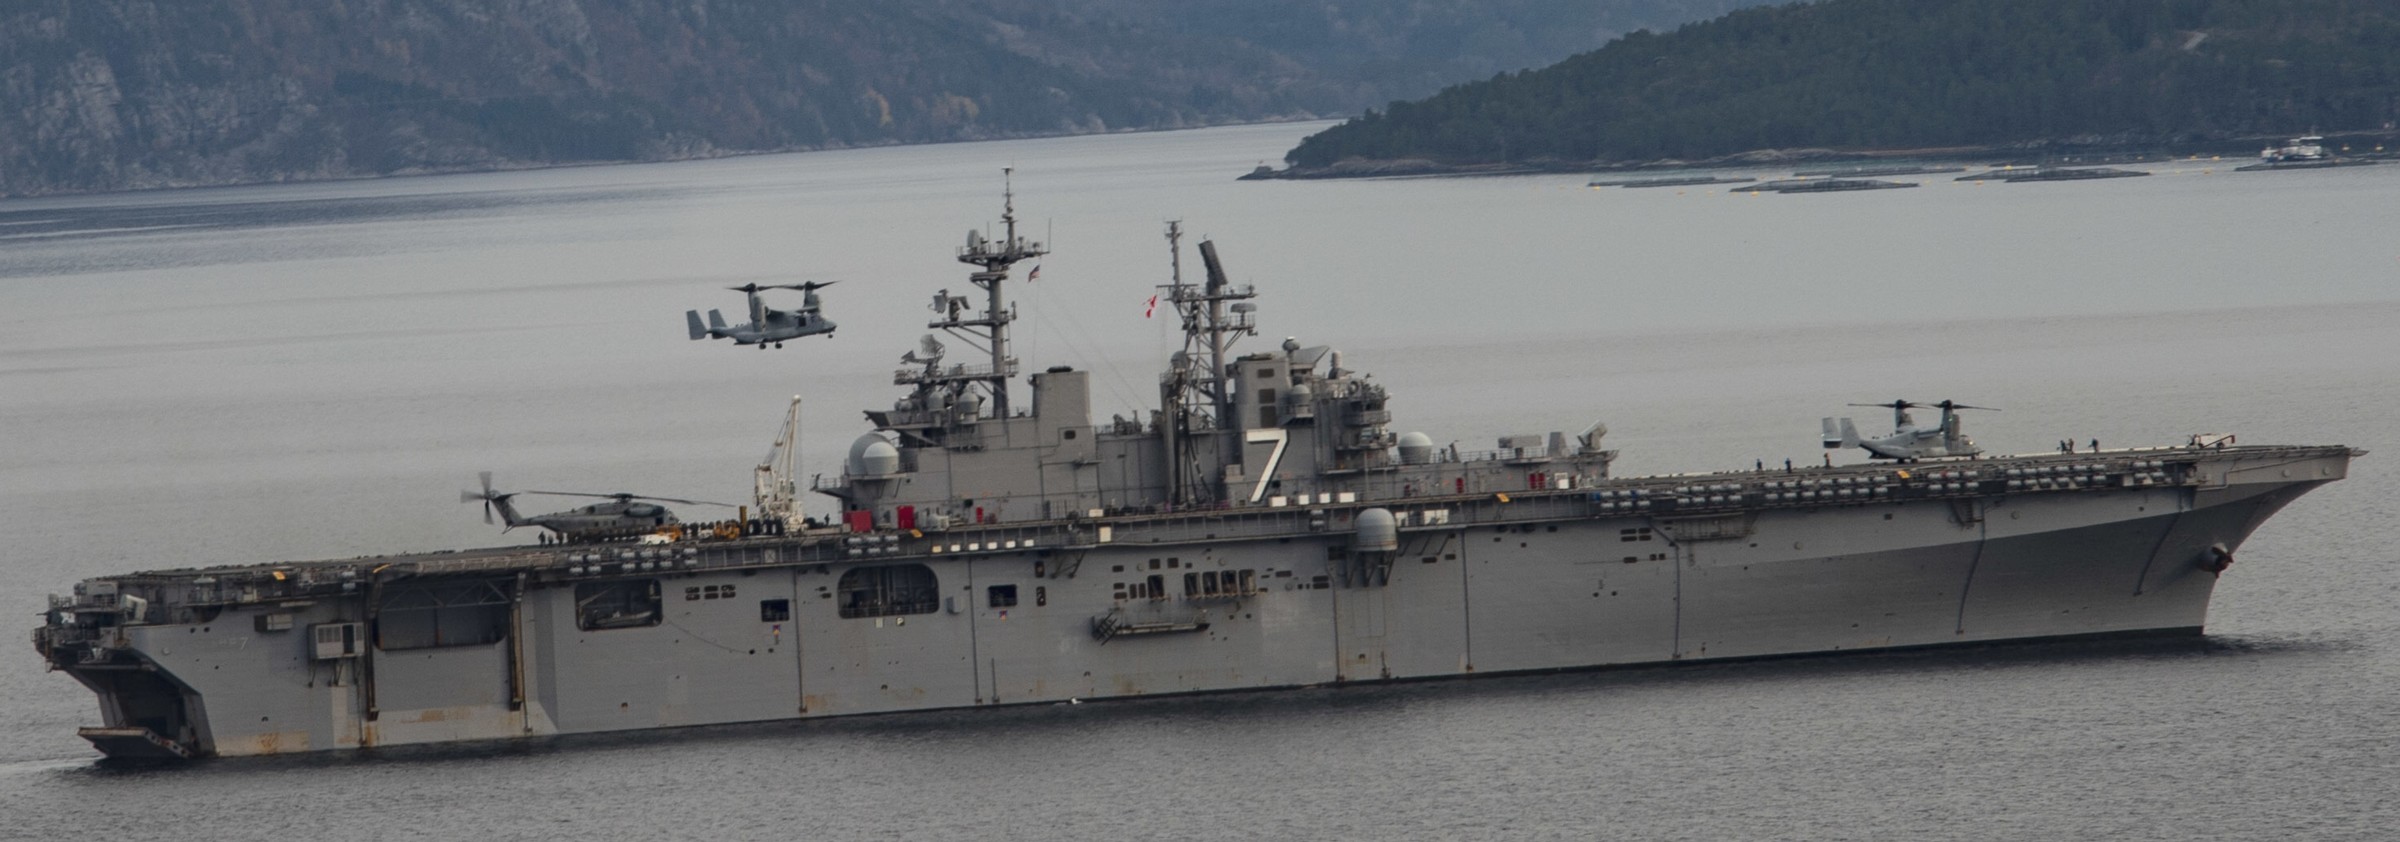 lhd-7 uss iwo jima wasp class amphibious assault ship dock landing helicopter us navy marines vmm-365 exercise trident juncture norway 183